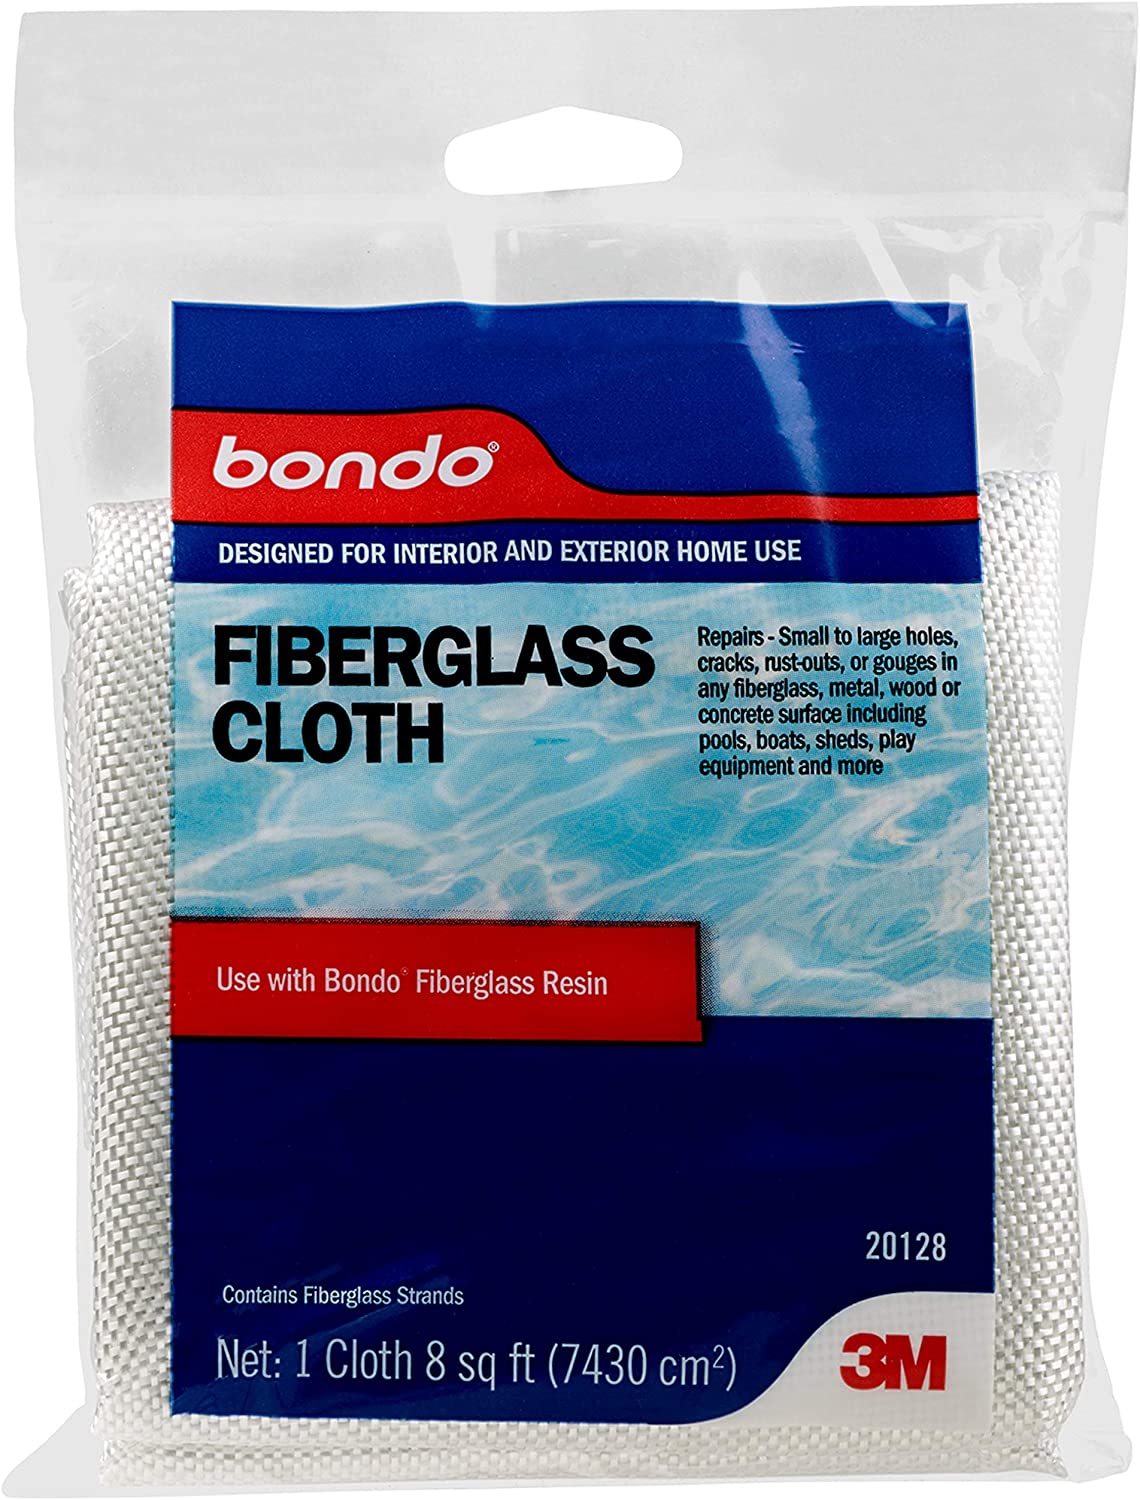 Bondo Fiberglass Cloth, Repairs Small to Large Holes, Cracks, Rust Outs or Gouges in Any Fiberglass, Metal, Wood or Concrete Surface Including Pools, Boats,...